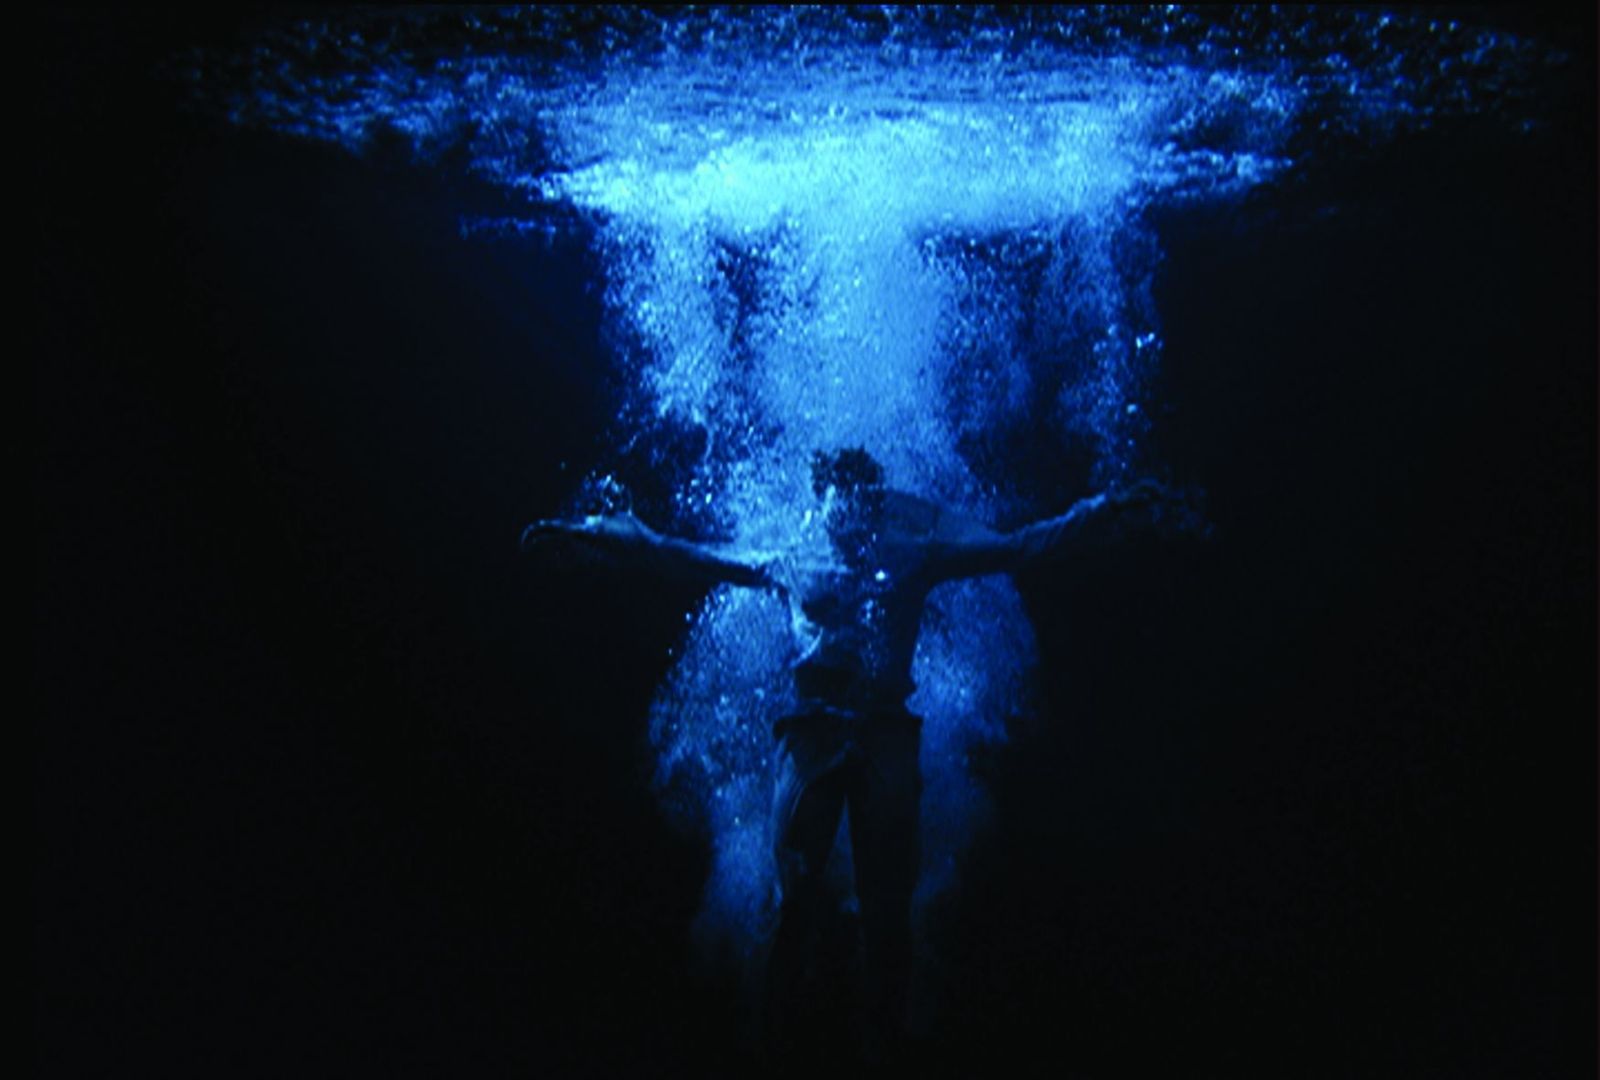 Ascension [Bill Viola] | Sartle - See Art Differently